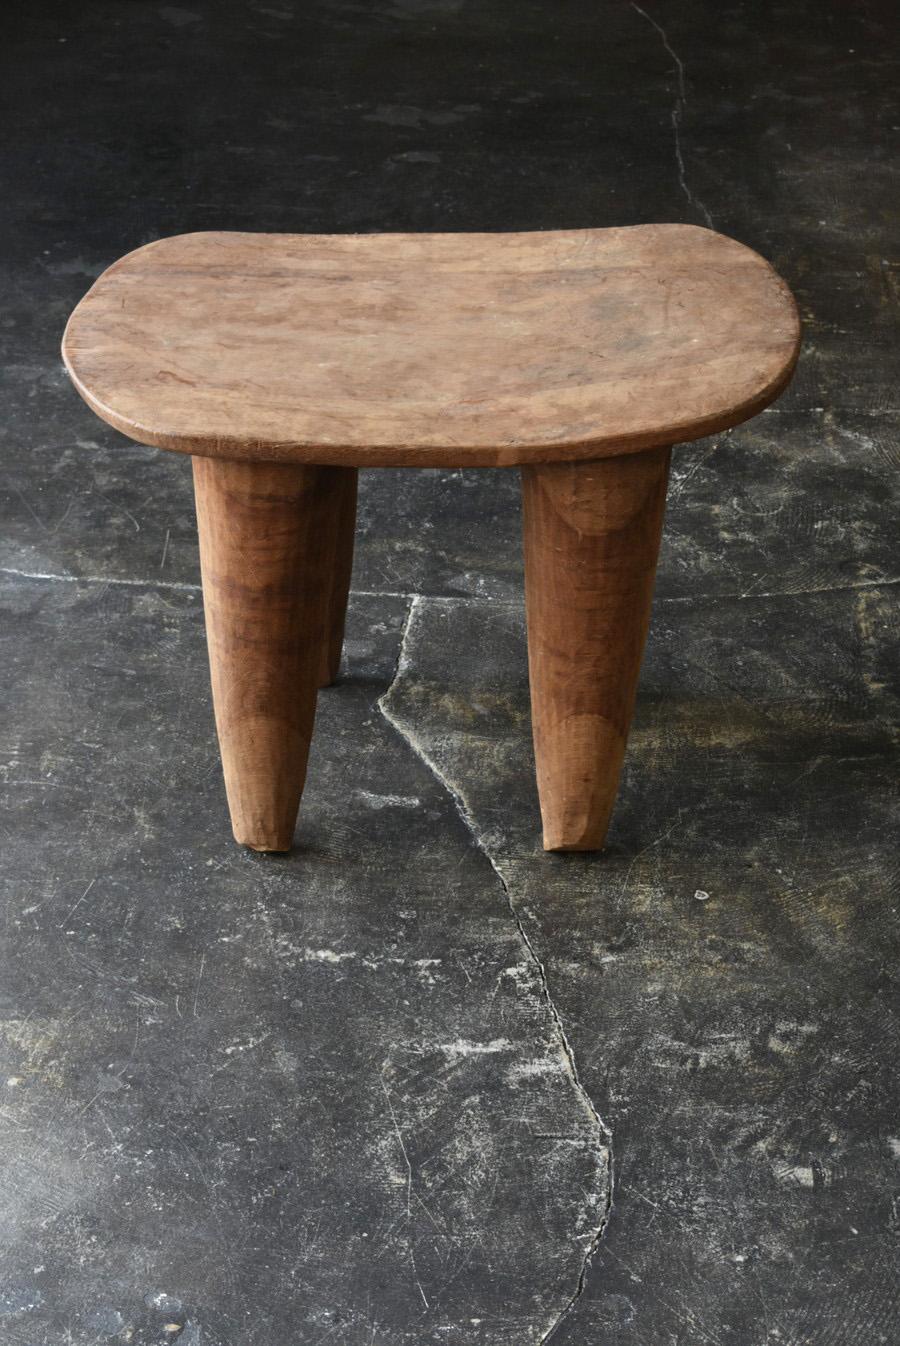 We have a simple and artistic wooden stool in stock.
This is a stool made by the Senufo tribe, who live in an area spanning the neighboring countries of Mali and Burkina Faso, mainly in the northern part of Côte d'Ivoire in West Africa.

They make